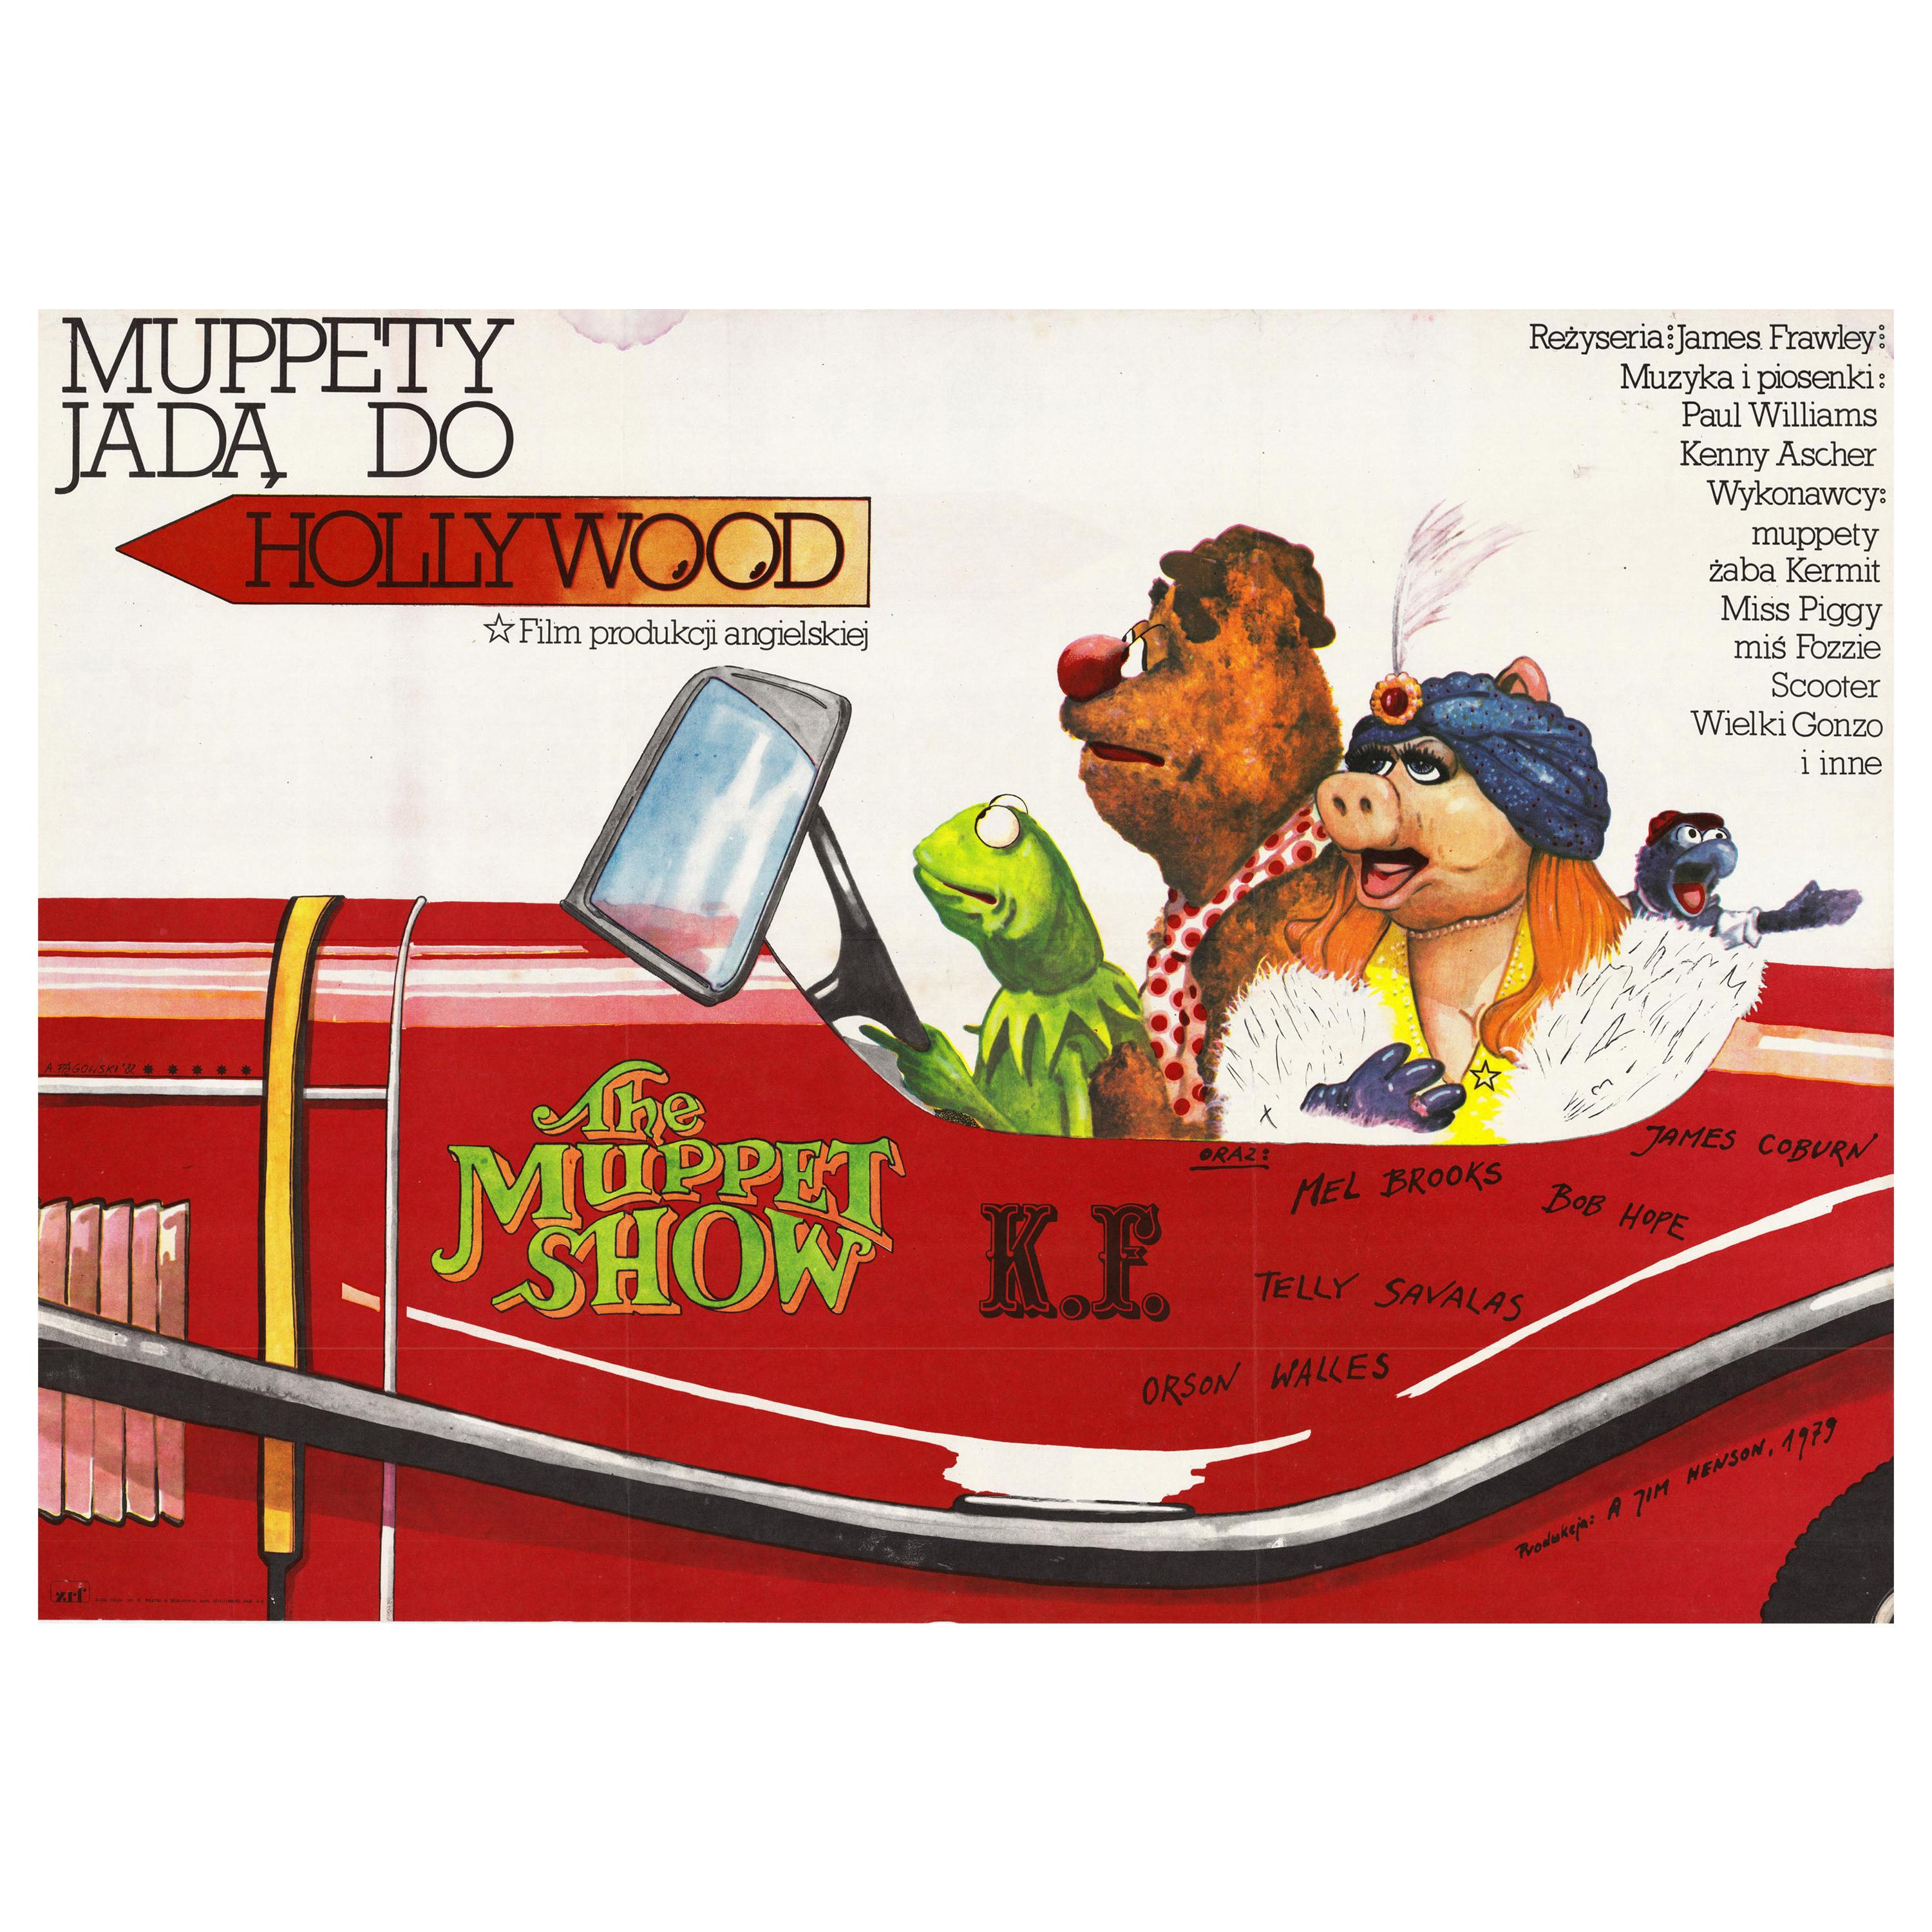 Vintage Polish The Muppet Movie Poster by Andrzej Pągowski for XRF, 1982 For Sale